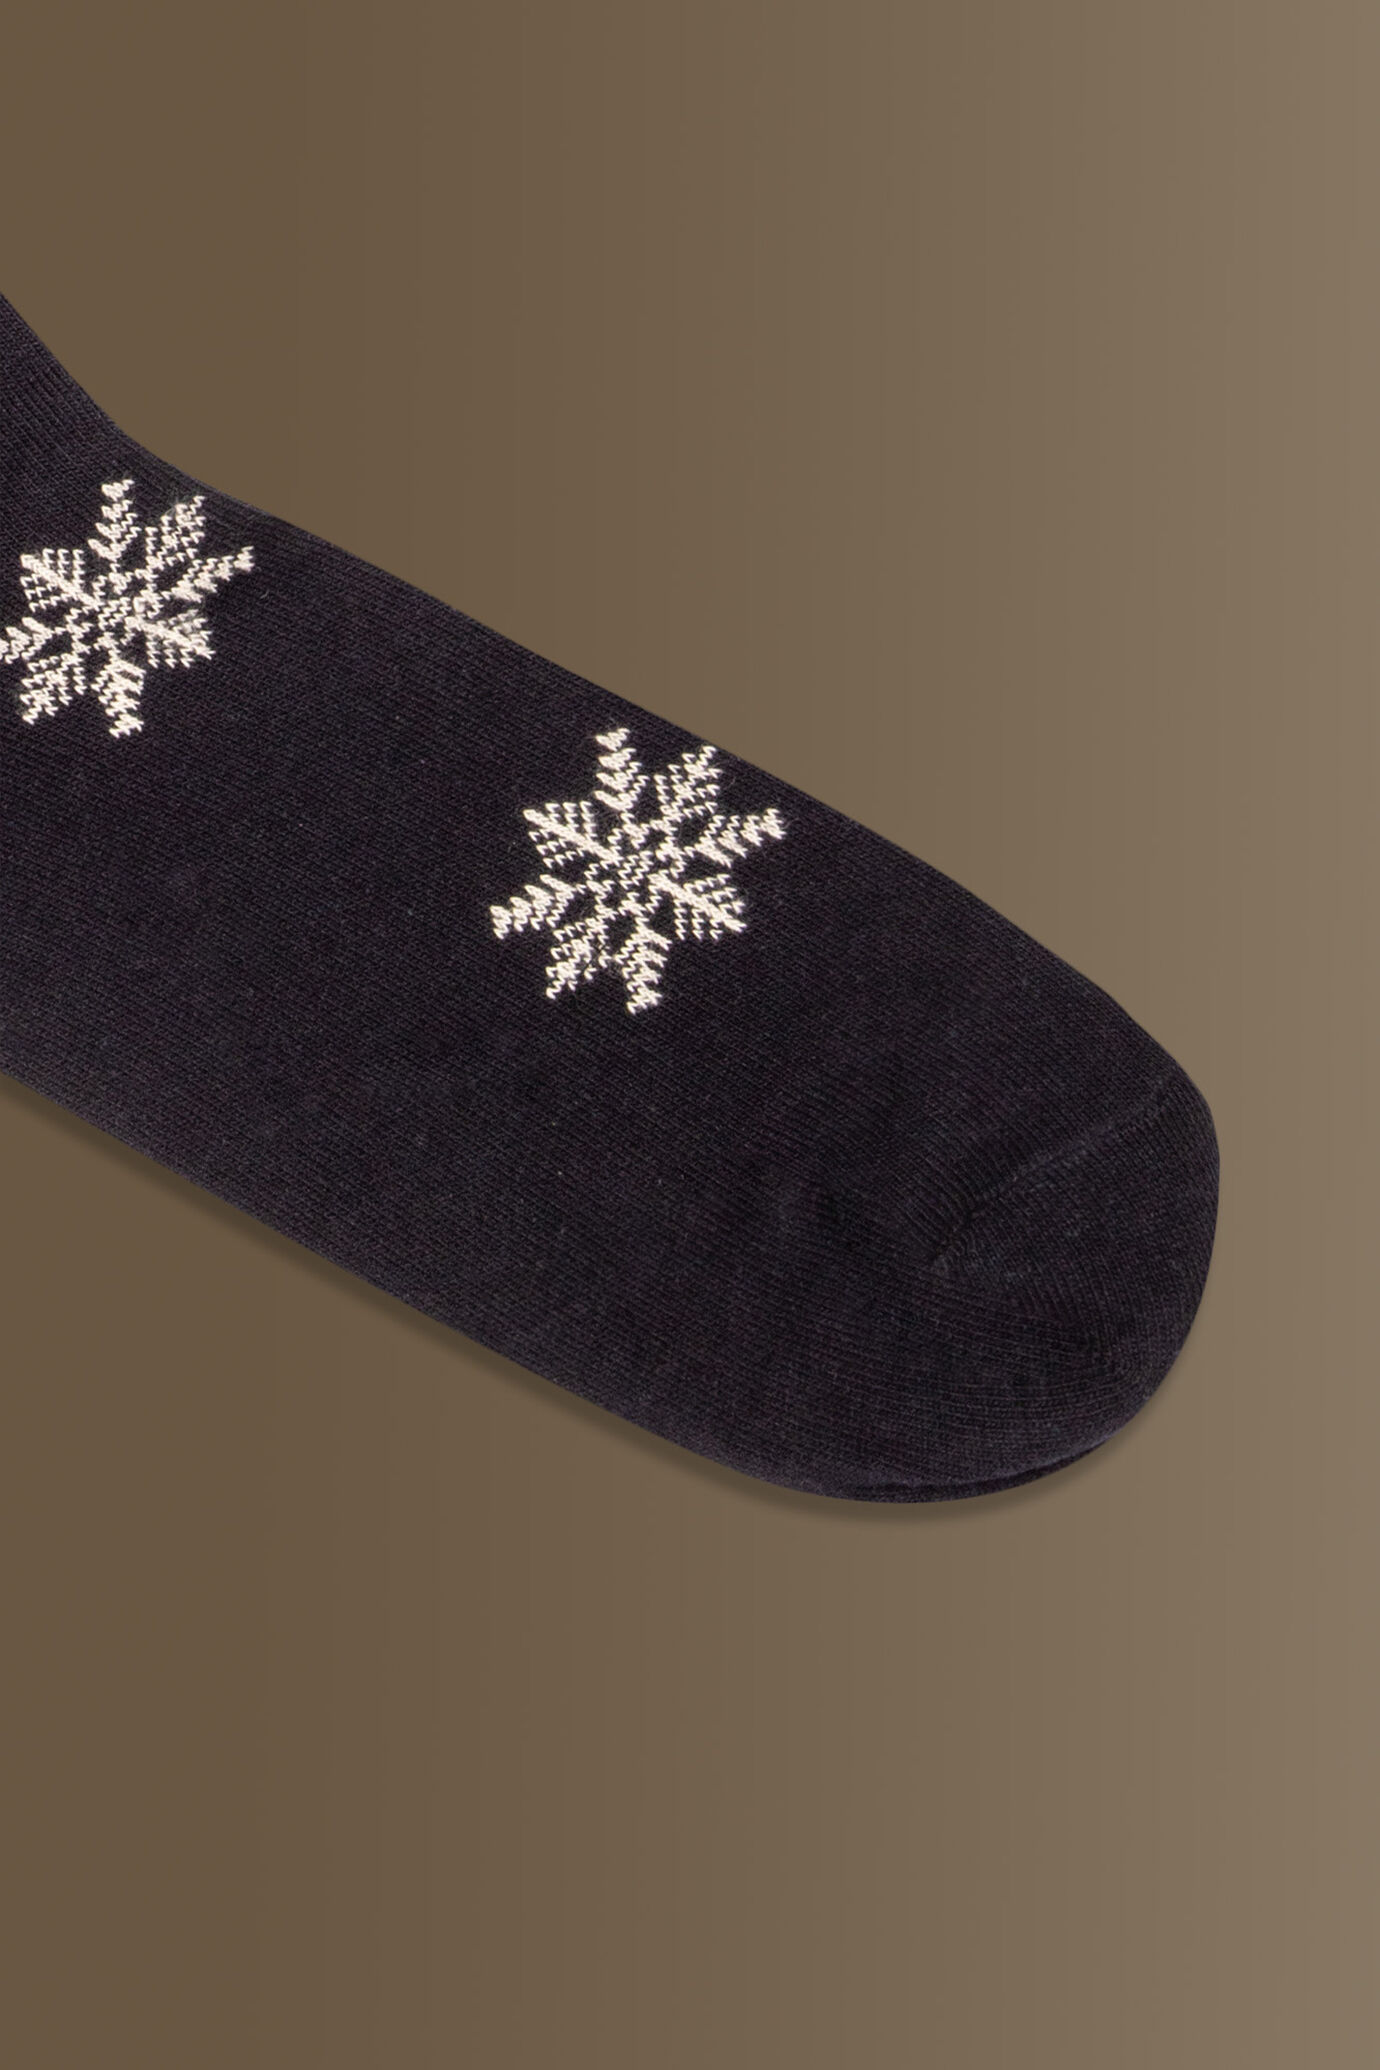 Socks - snowflake fancy - cotton stretch image number 1